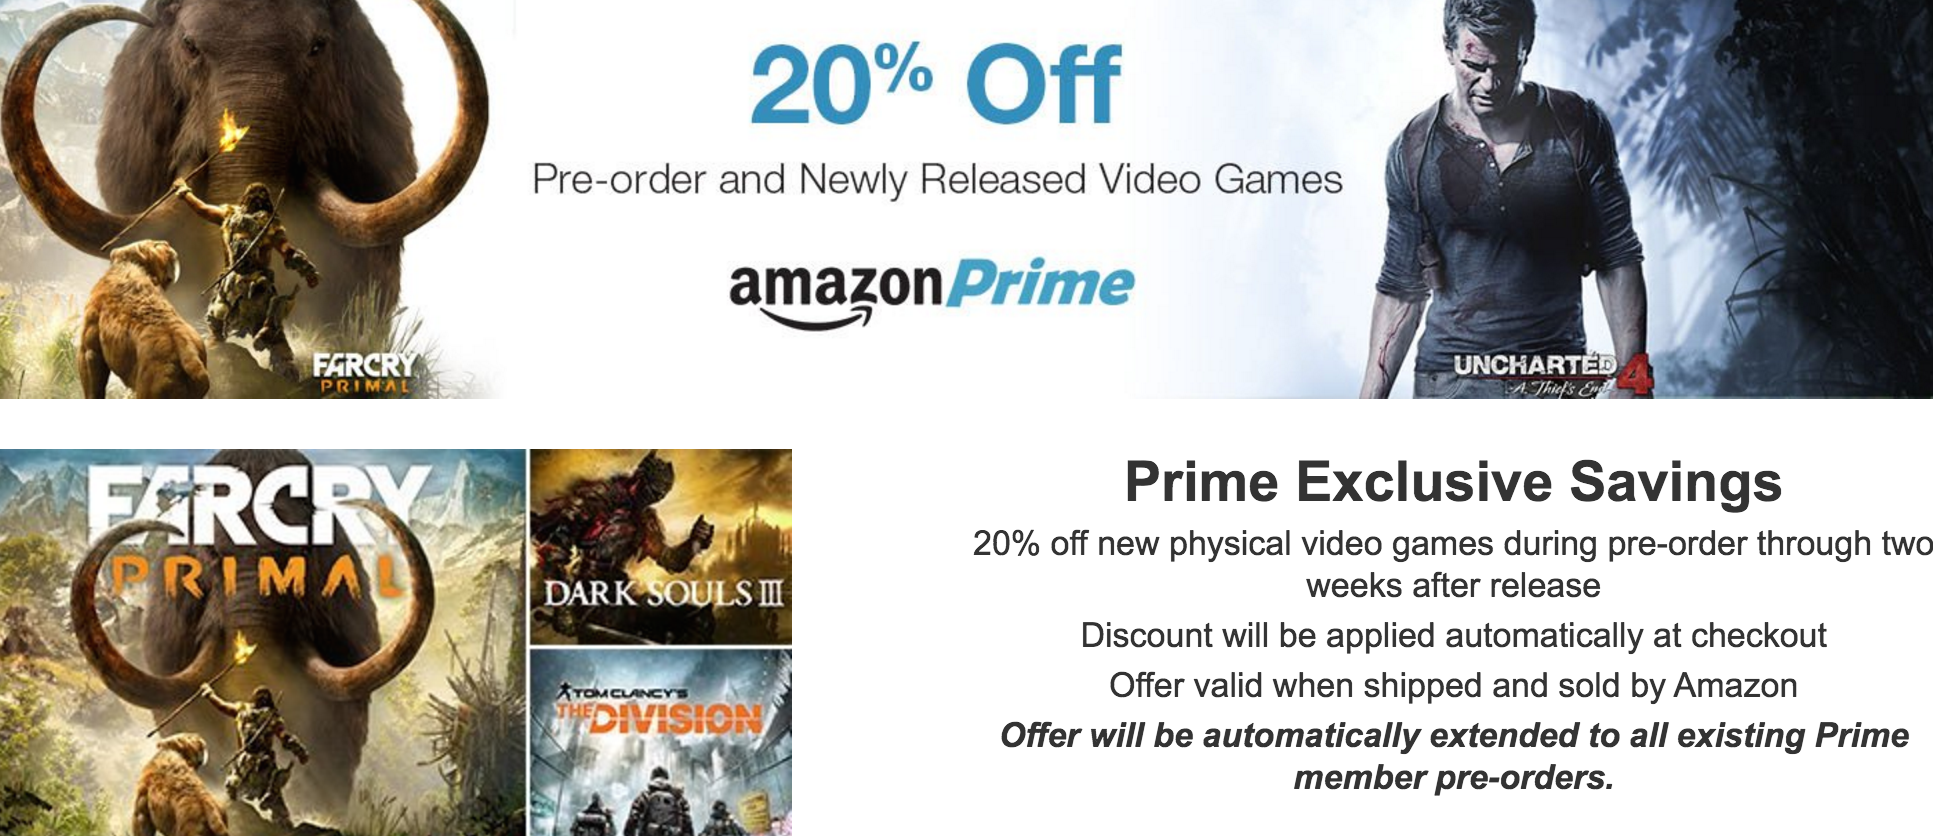 Amazon Prime for Gamers